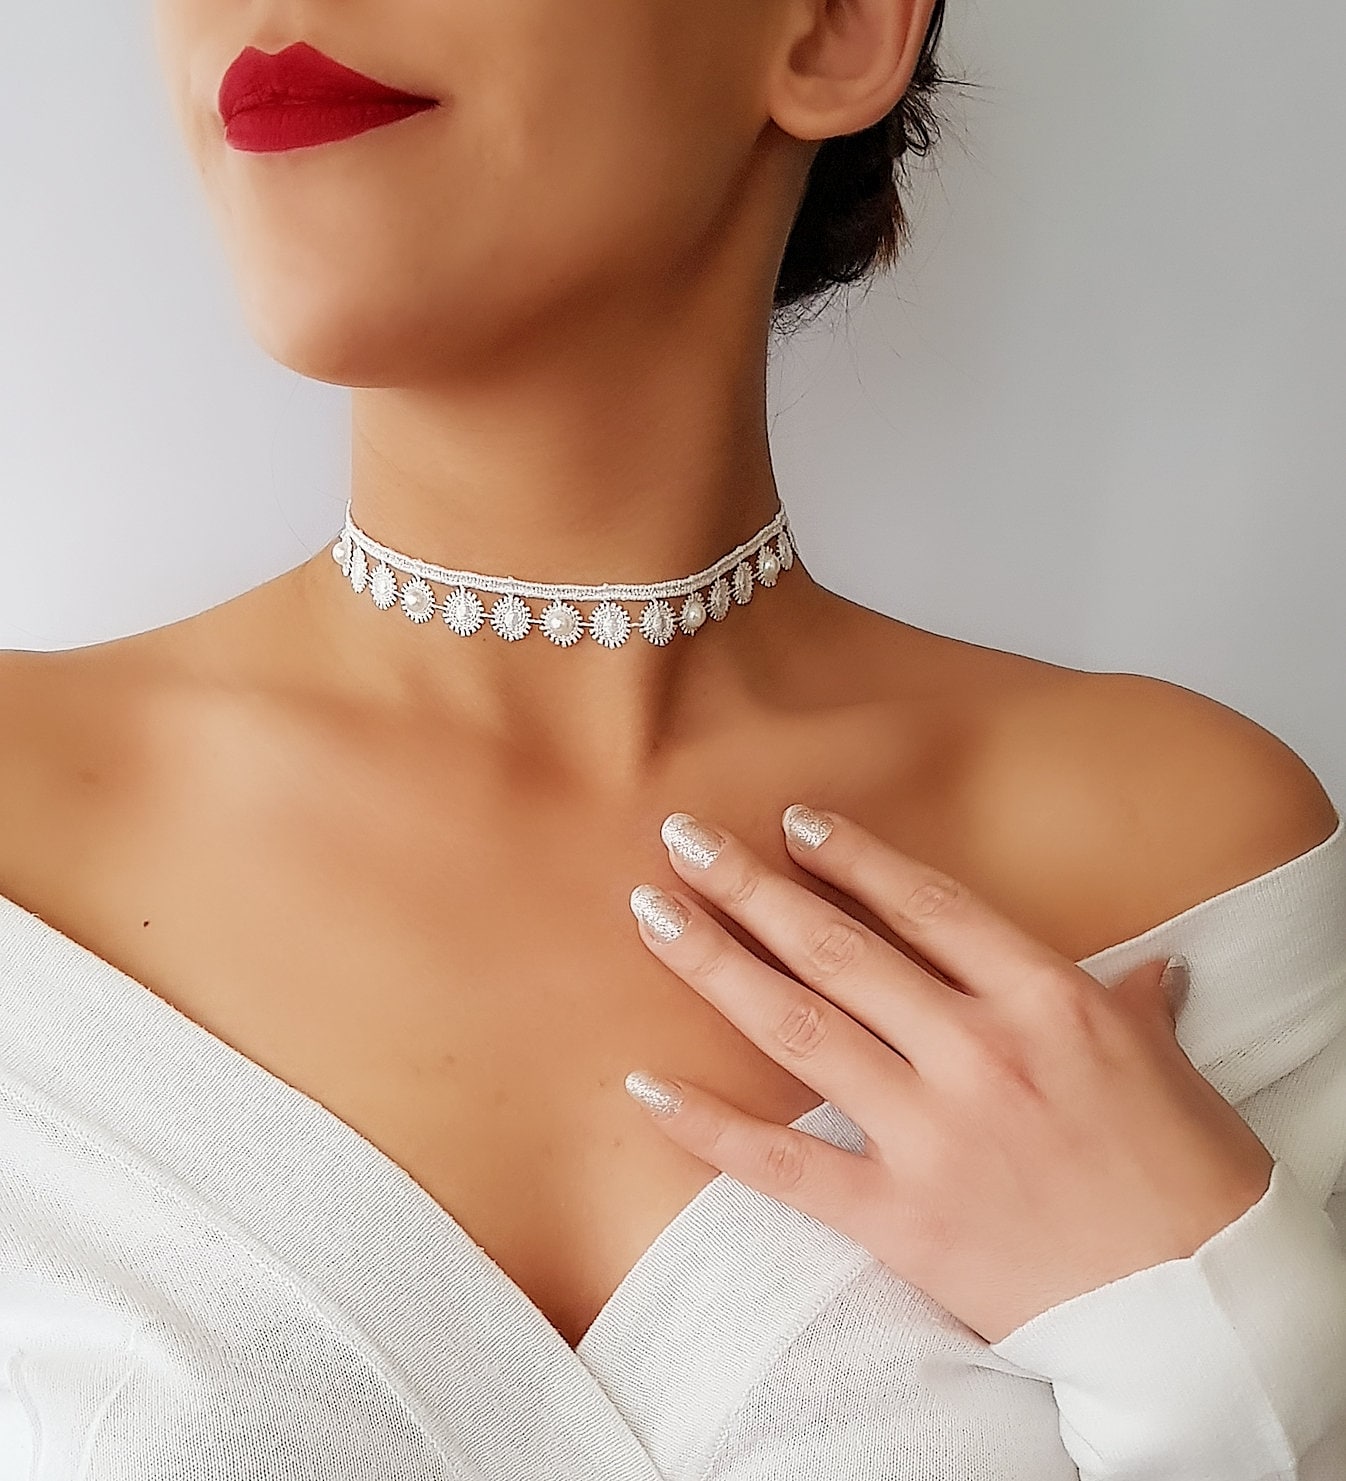 Naughty or Nice Lace Choker - White or Black White